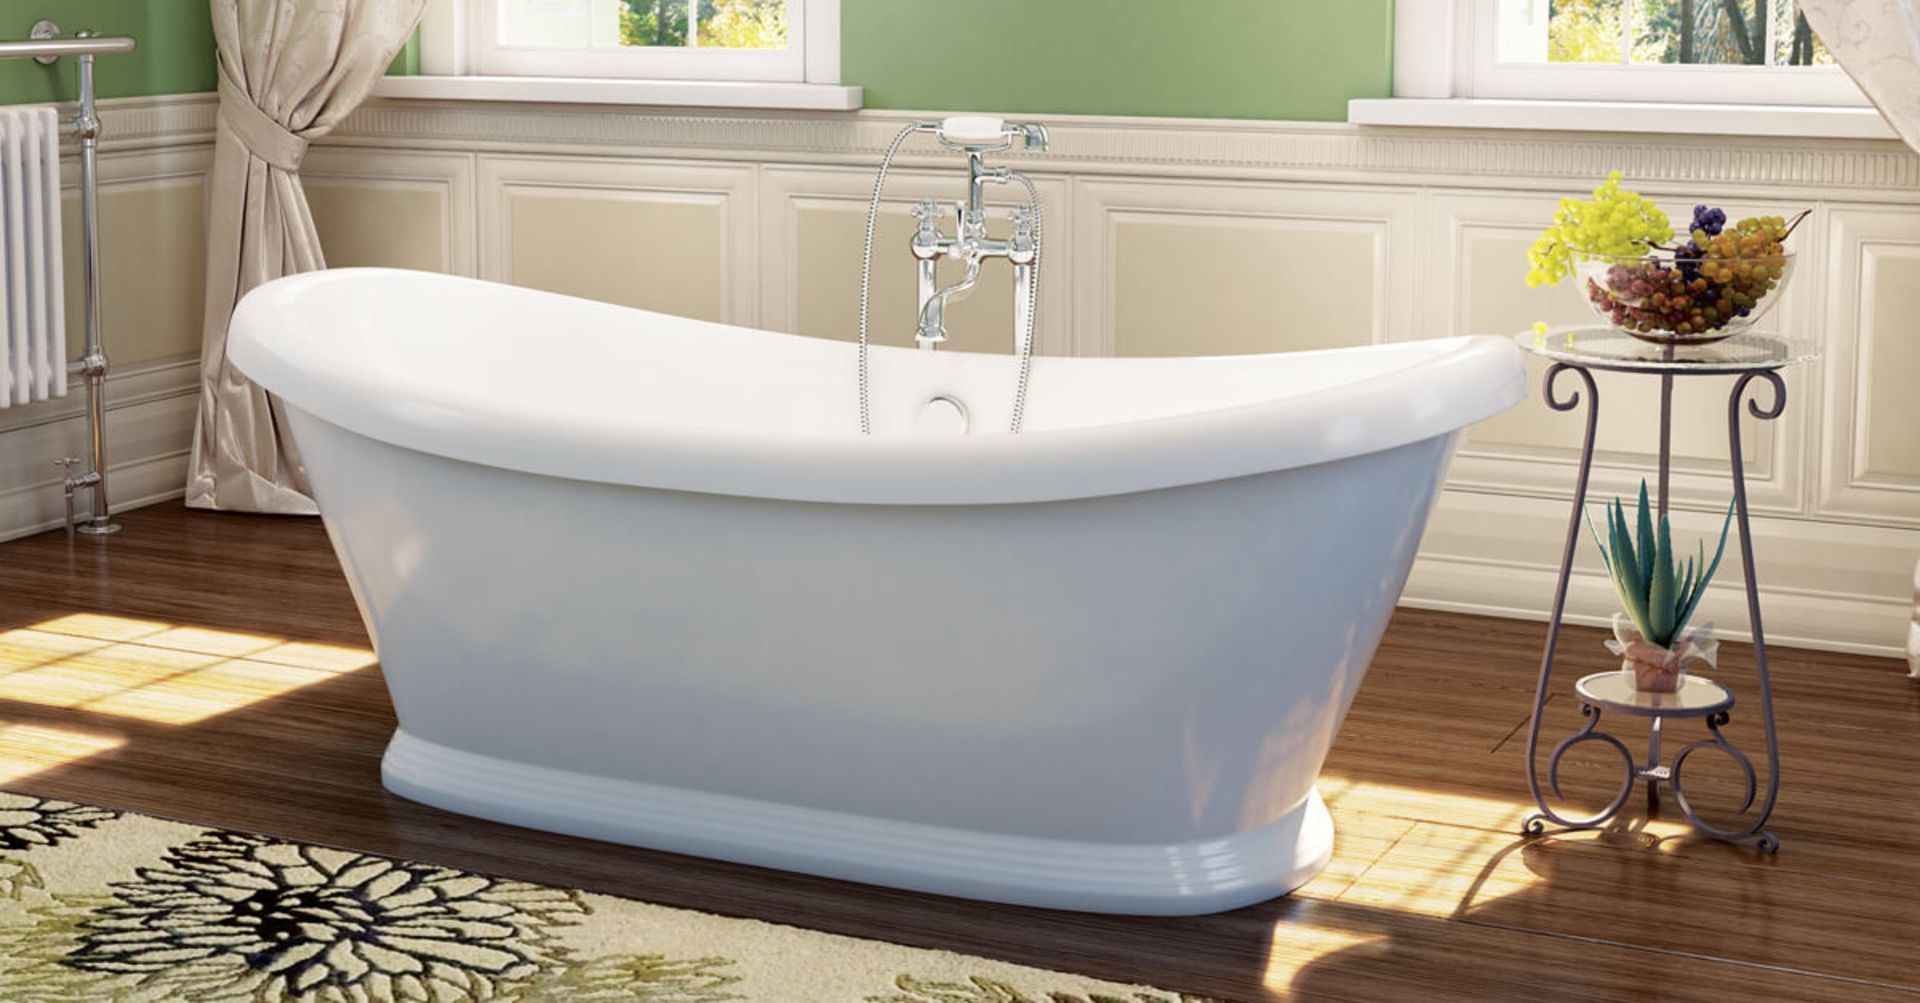 NEW (Z8) Grace 1760x700mm Freestanding 2 Tap Hole Bath With Panel.RRP £1,475.96.Featuring A